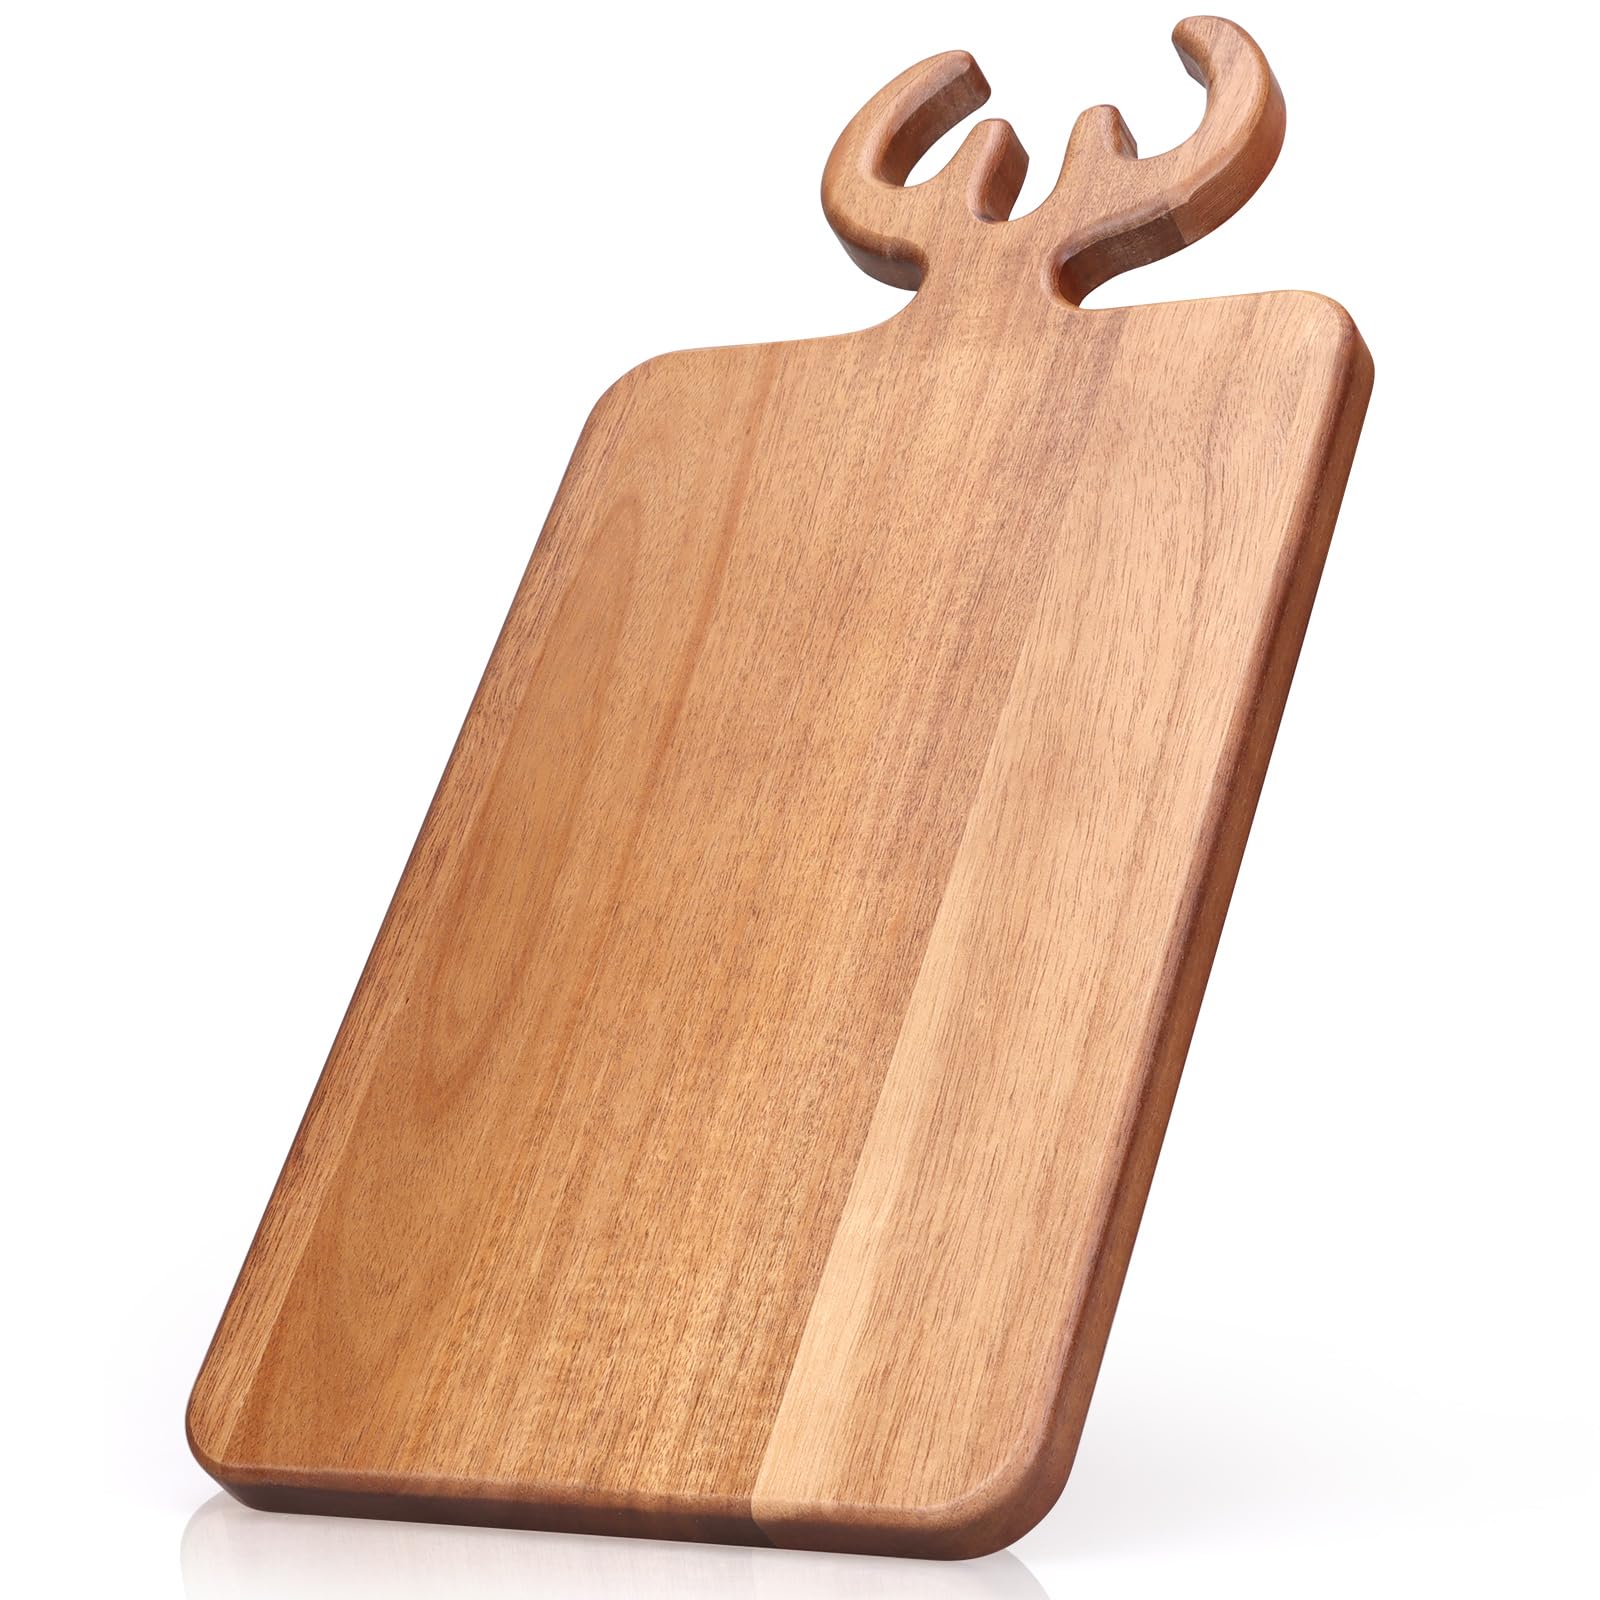 Durable and Hygienic Wood Meat Cutting Board